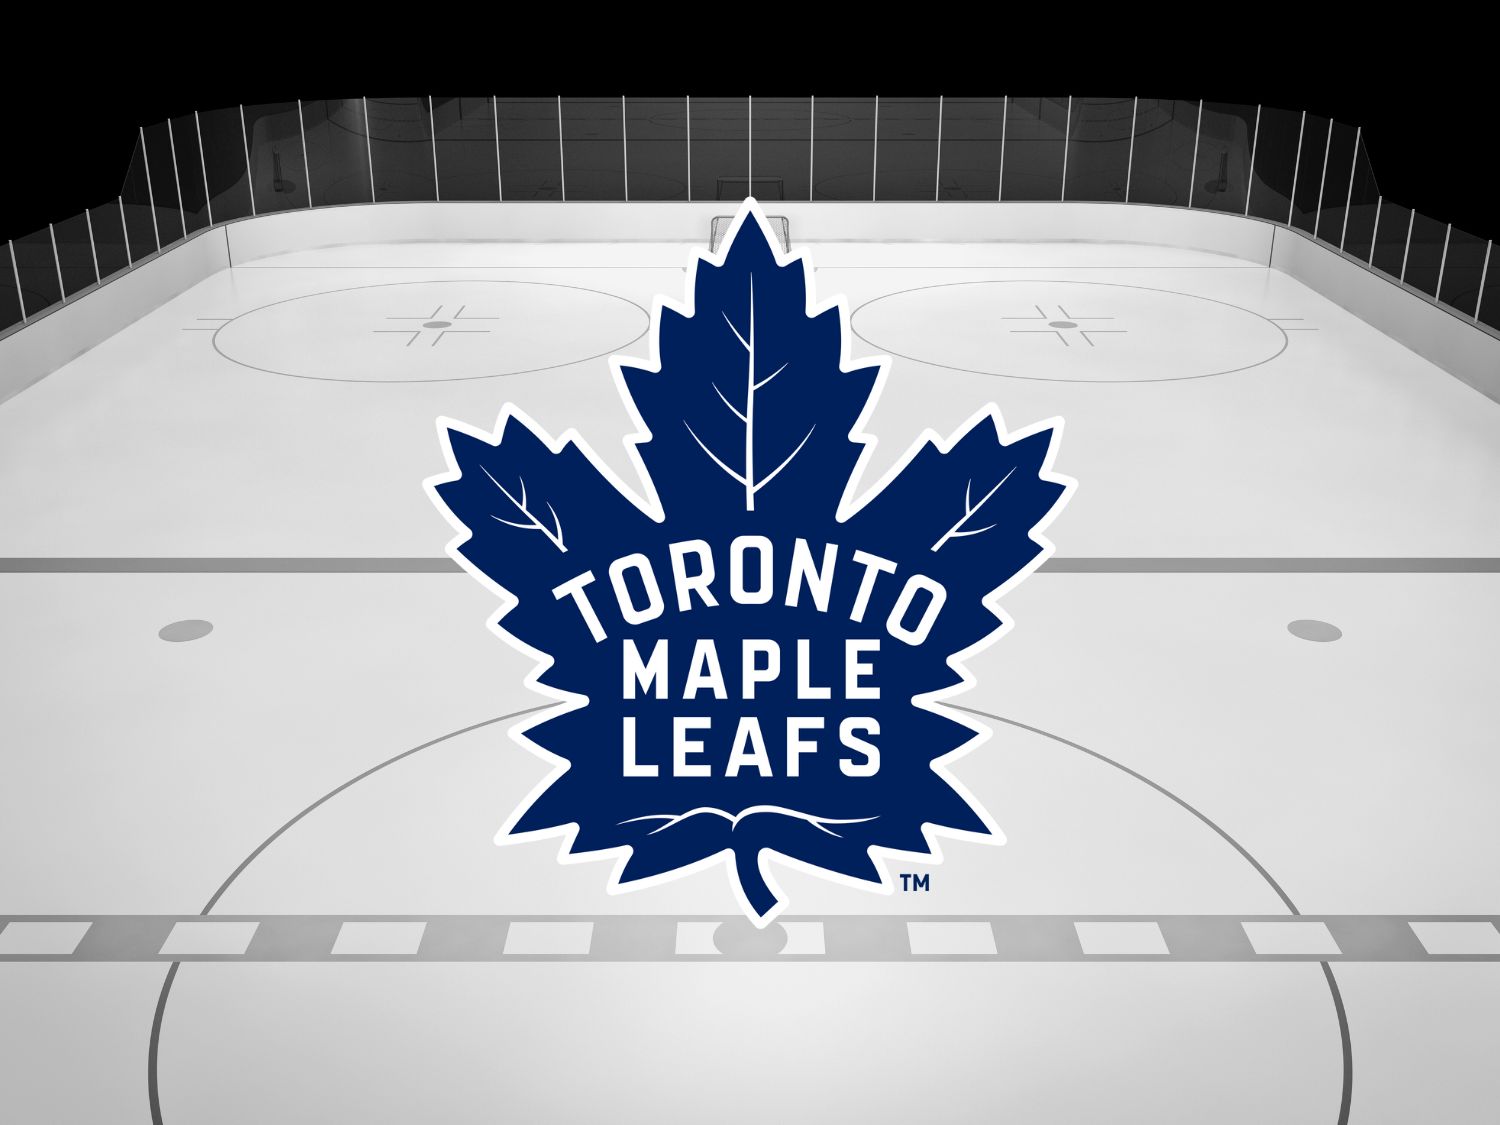 Toronto Maple Leafs Tickets and Seats